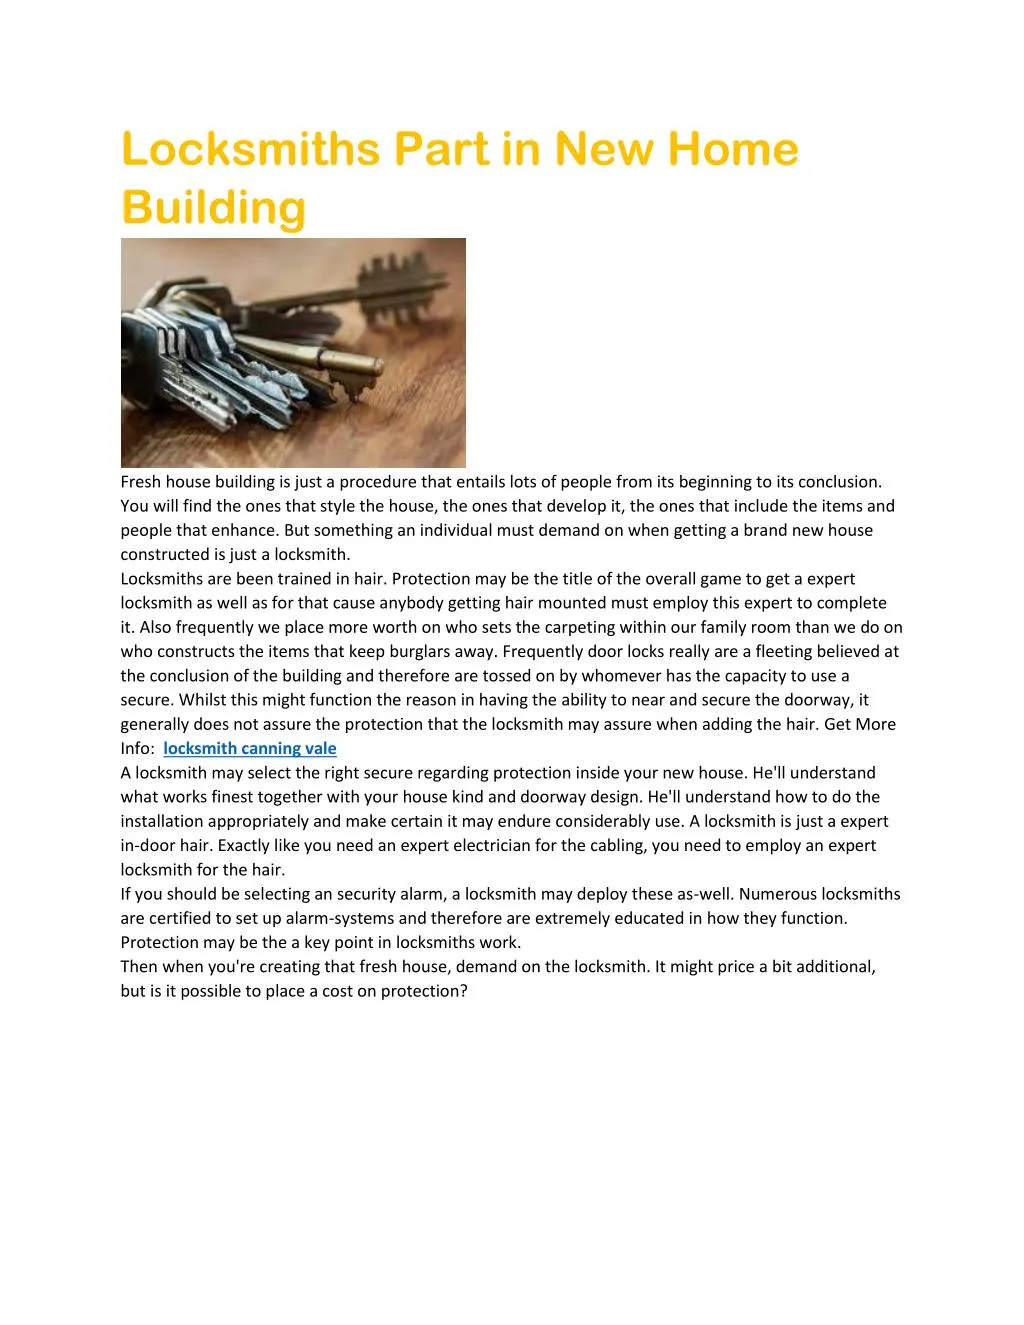 locksmiths part in new home building